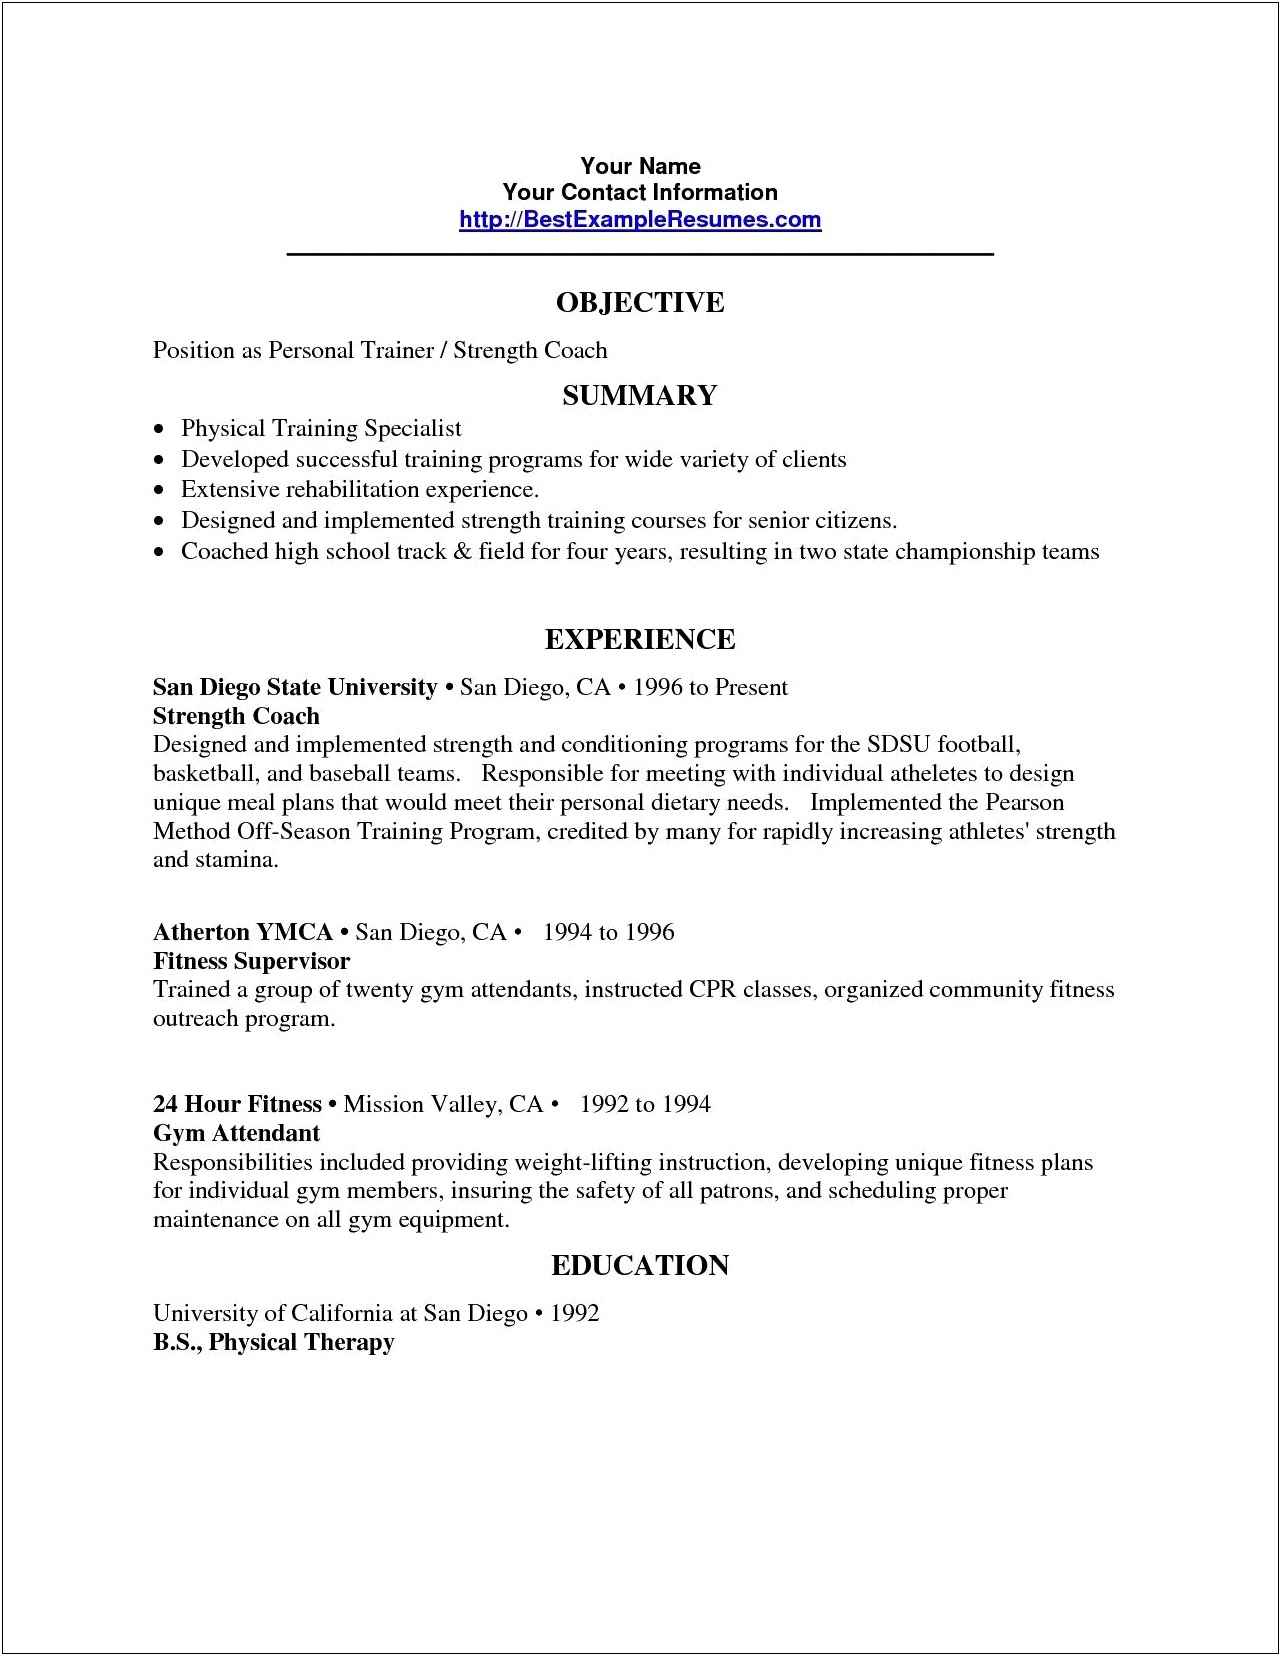 Resume Objective For Training Specialist Position